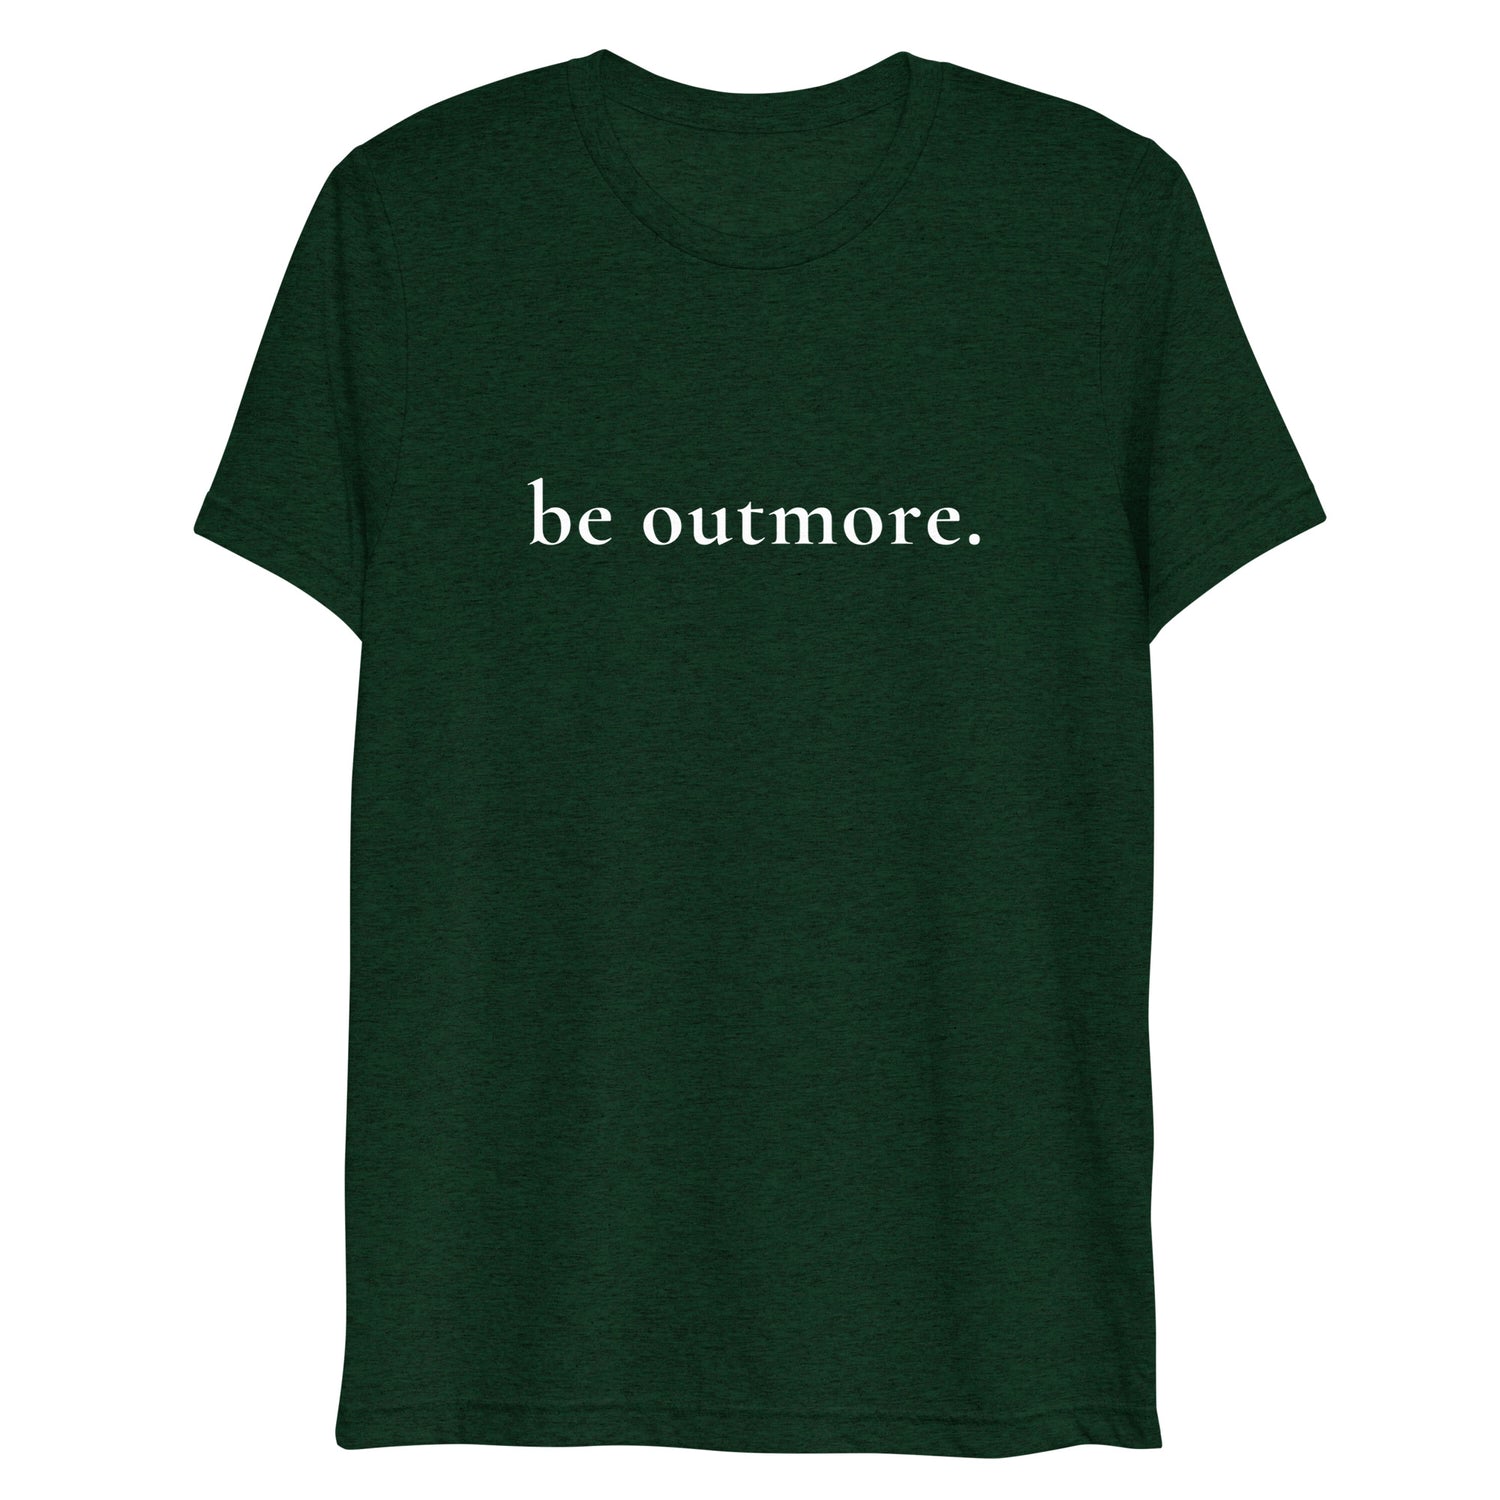 be outmore. T-Shirt 